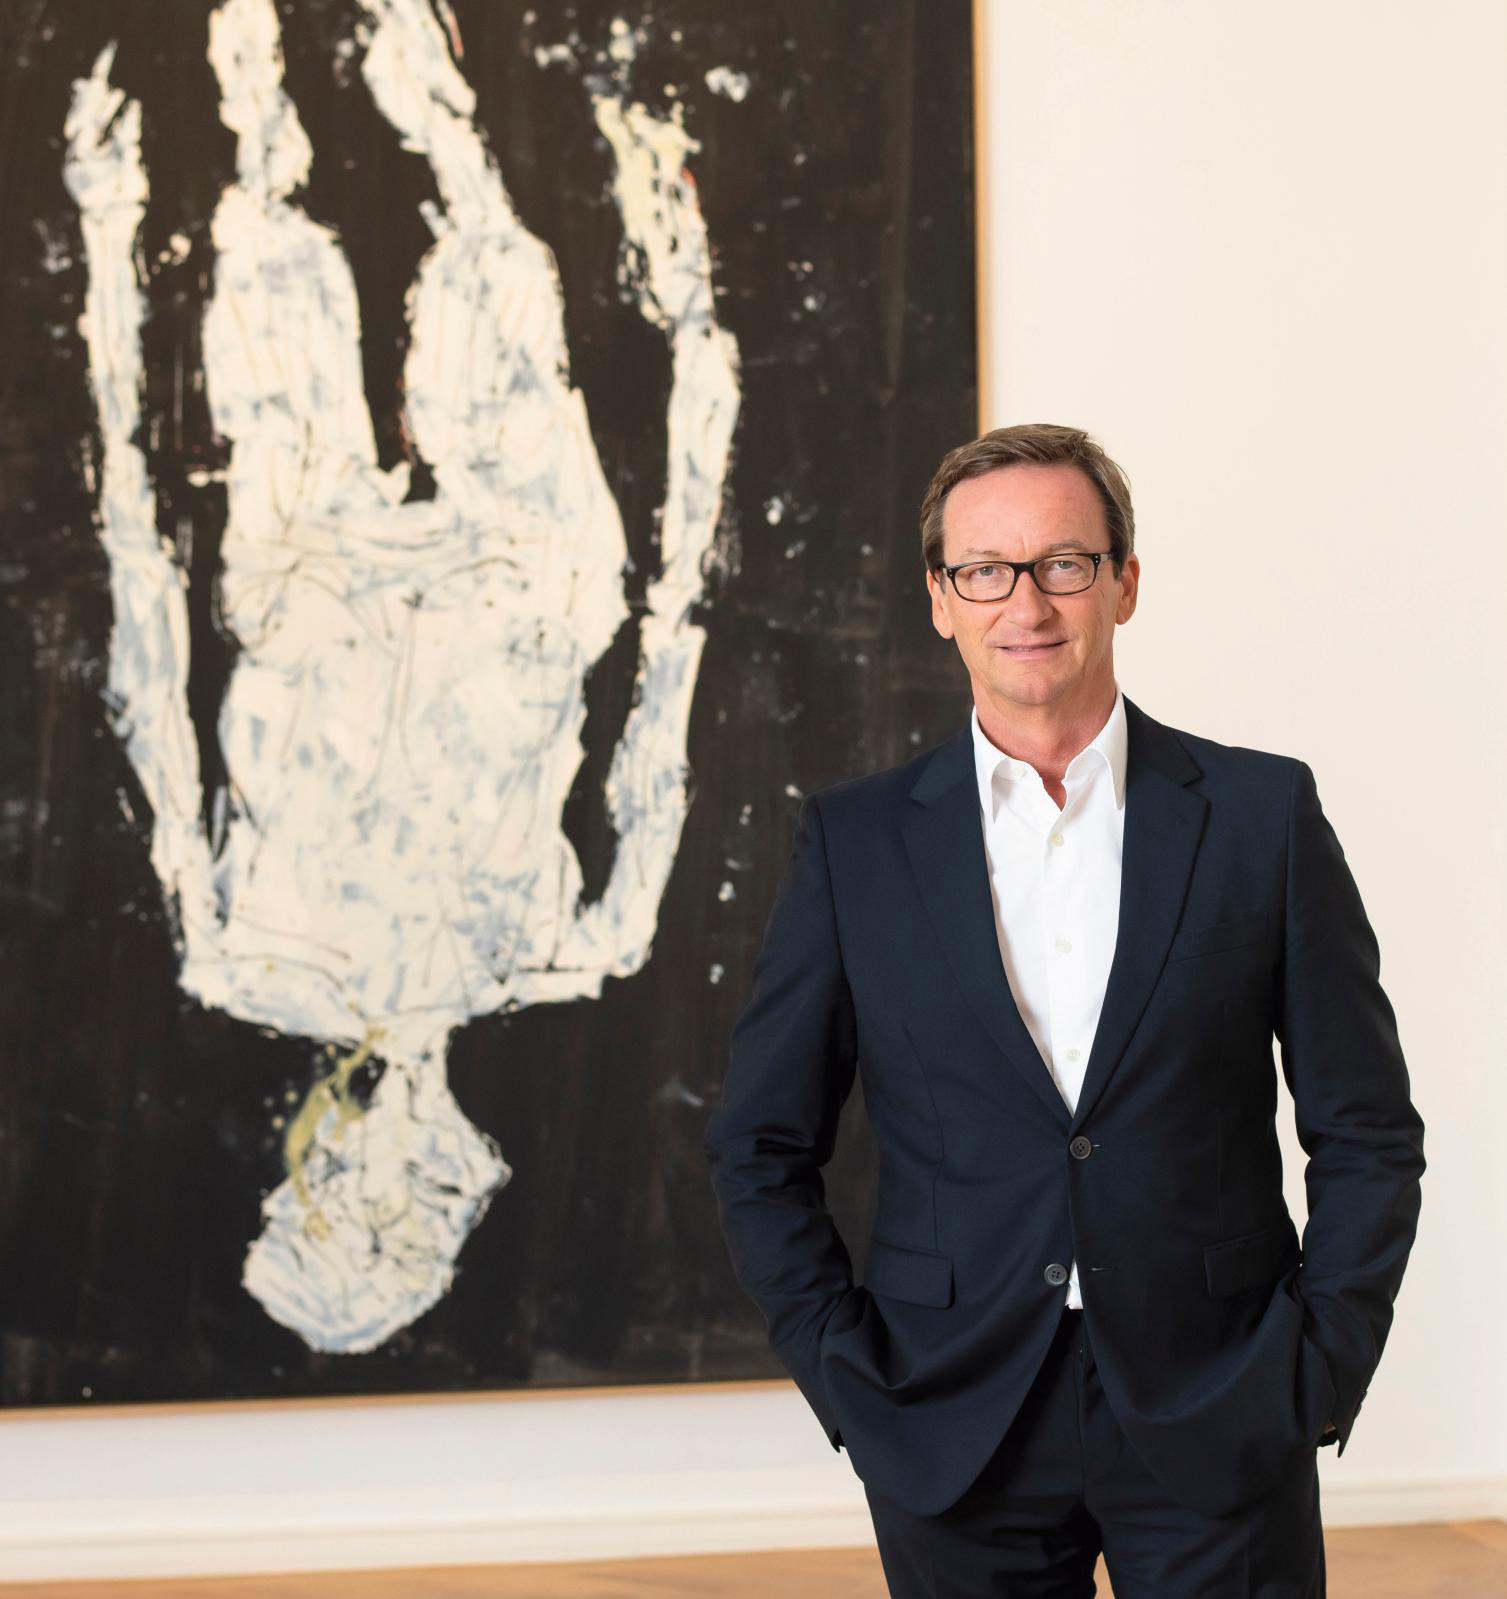 Gallerist Thaddaeus Ropac Puts Art at the Center of Society